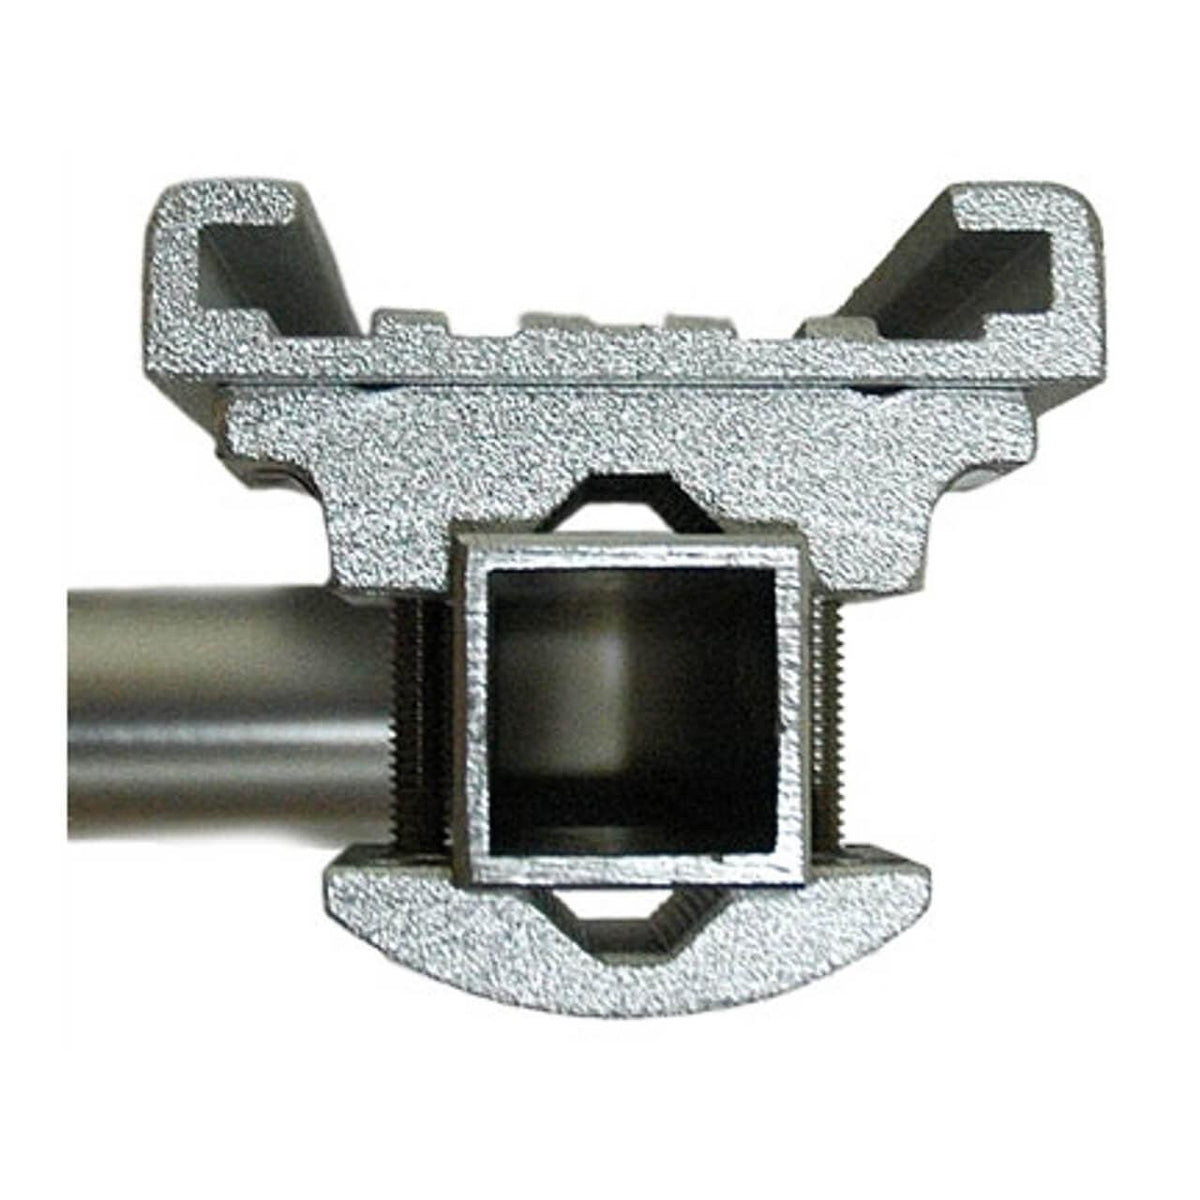 View of boating_accessories Traxstech Rail mounts for mounting tracks fits round rails 3/4" to 1-1/4" dia rails and 1-1/4" square rails - 2 pack Silver available at EZOKO Pike and Musky Shop